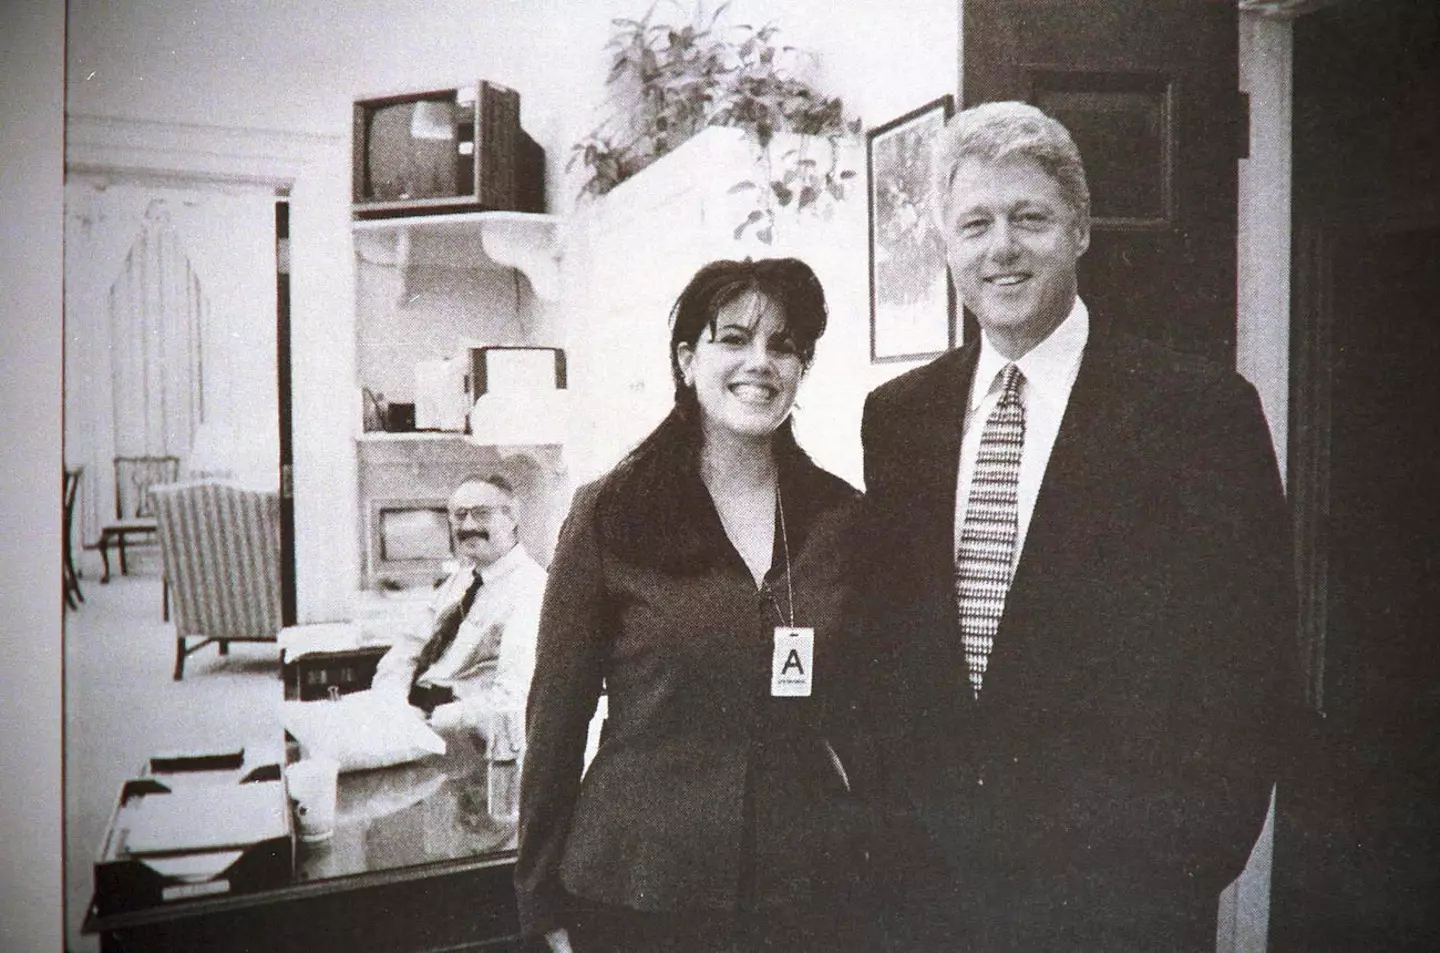 Lewinsky made headlines around the world after she had an affair with then President Bill Clinton.